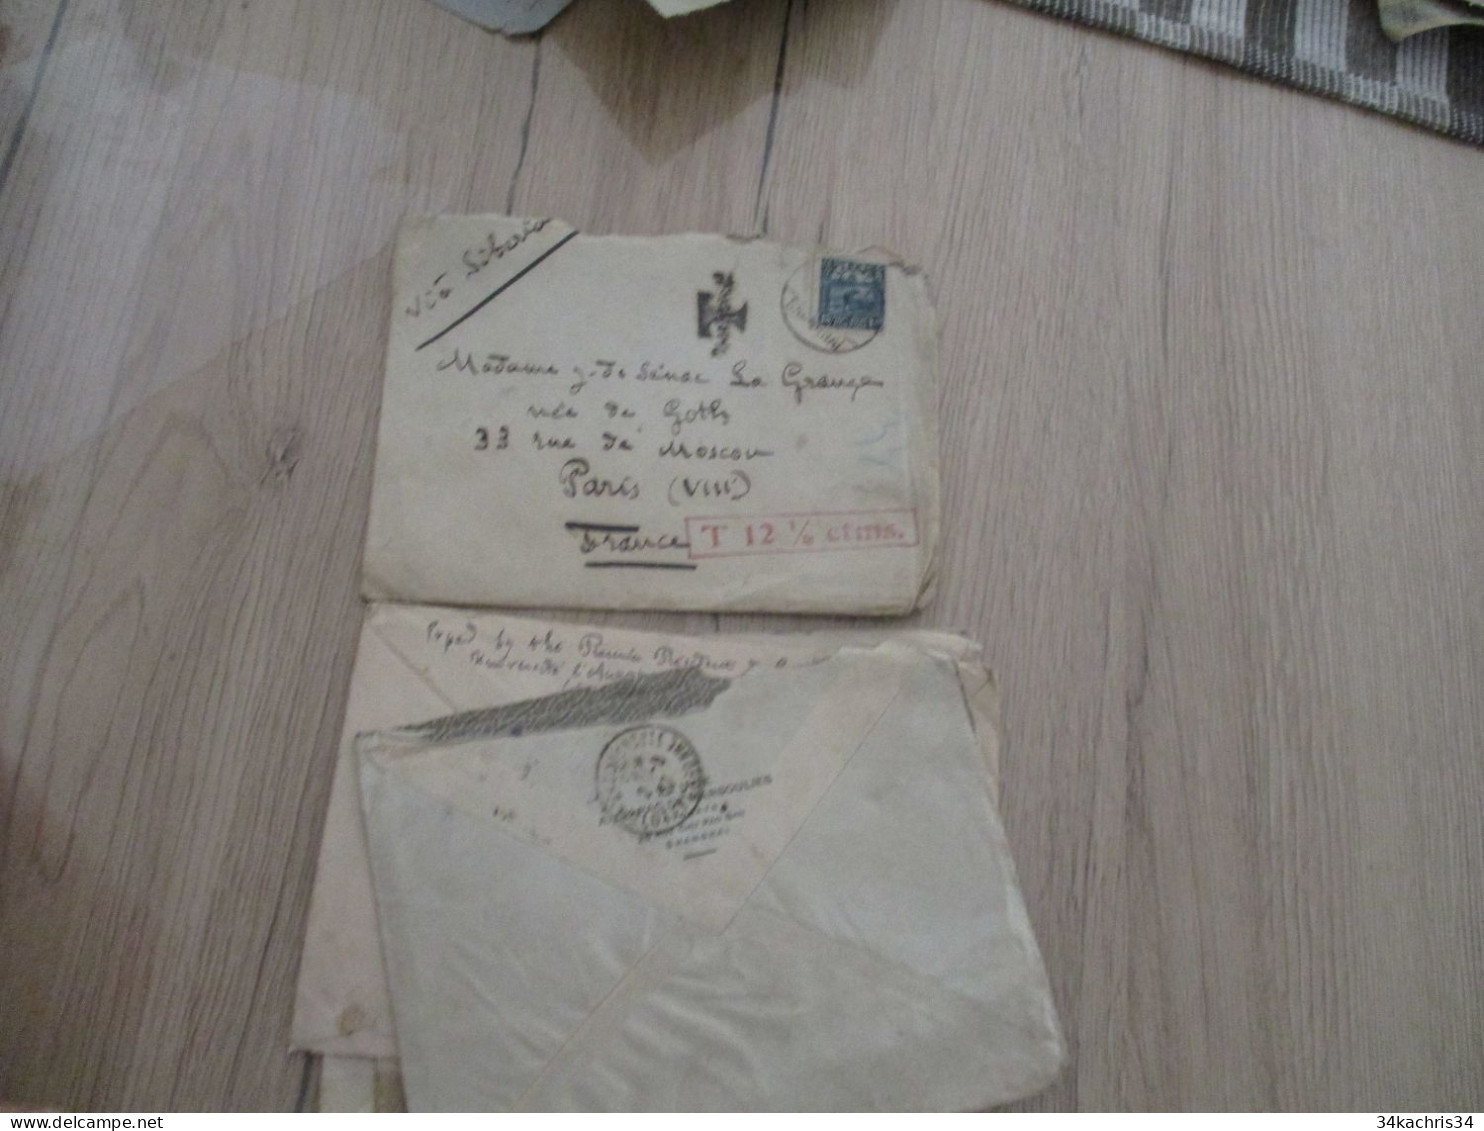 Lot 11 lettres letters Chine China même archive